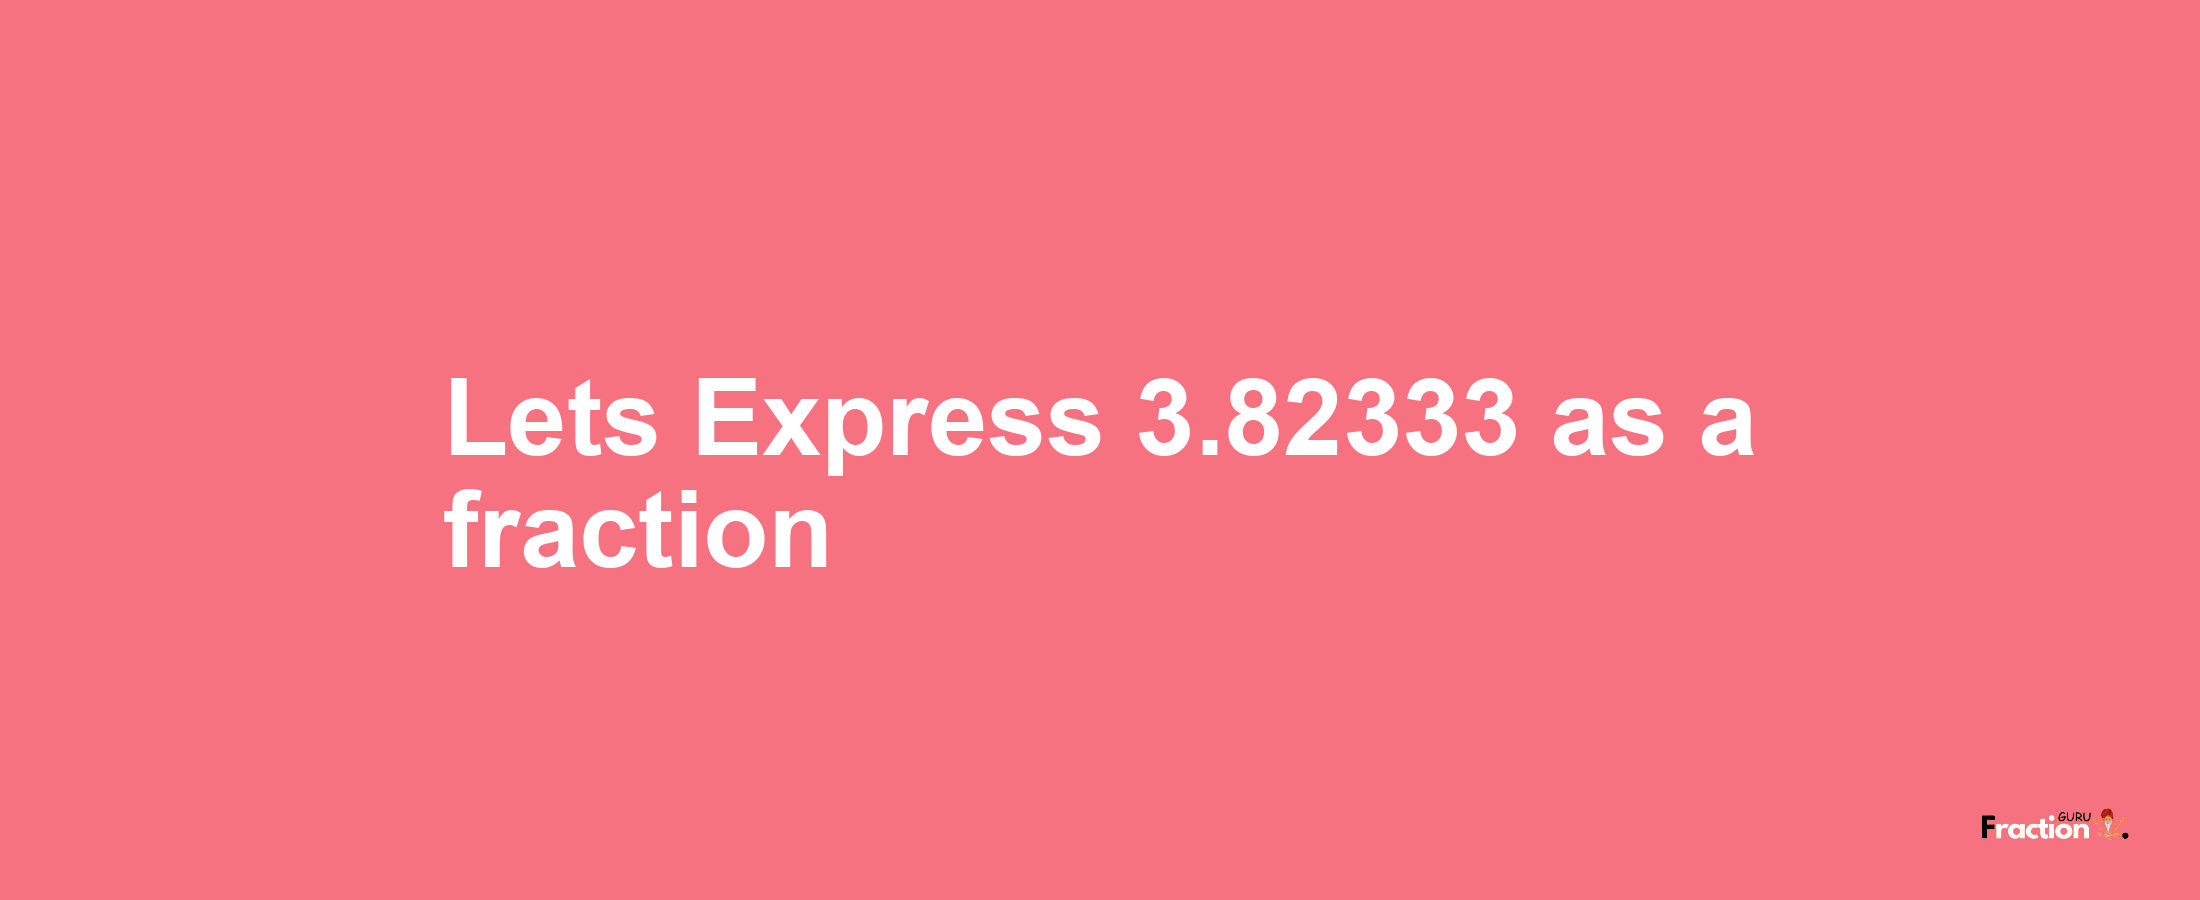 Lets Express 3.82333 as afraction